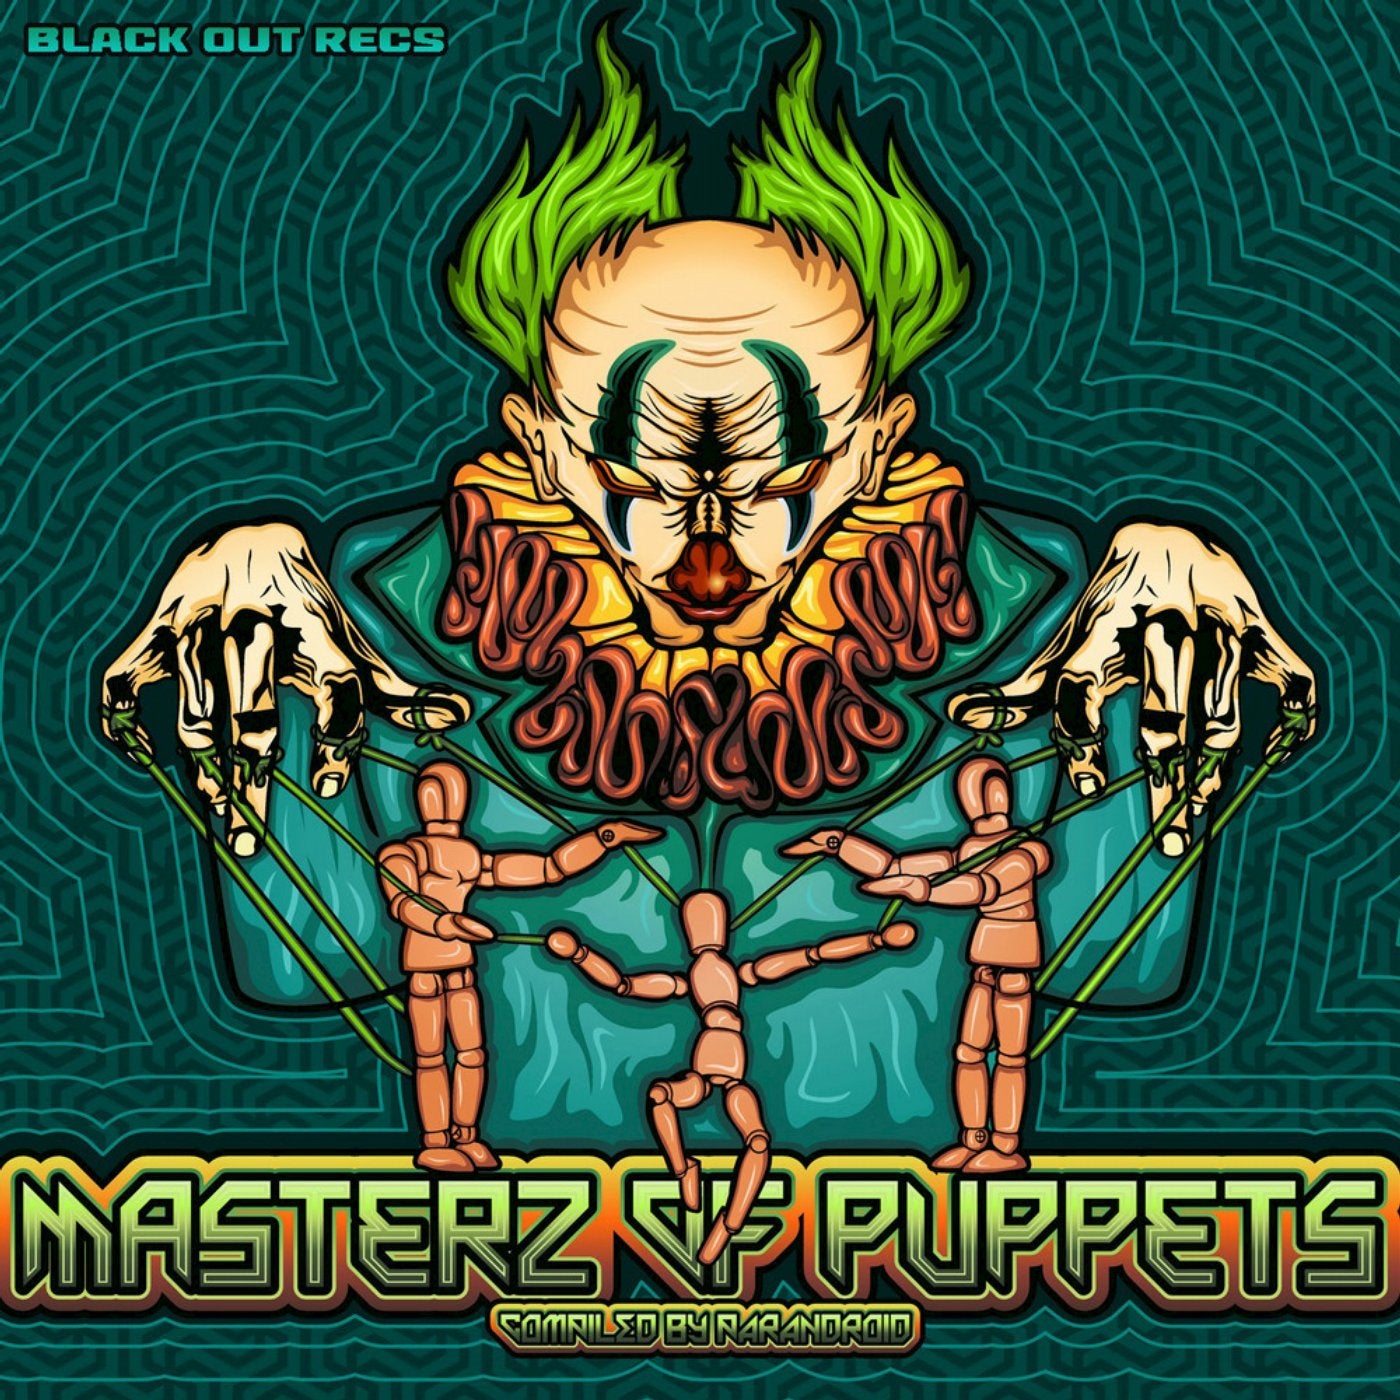 Masterz of Puppets